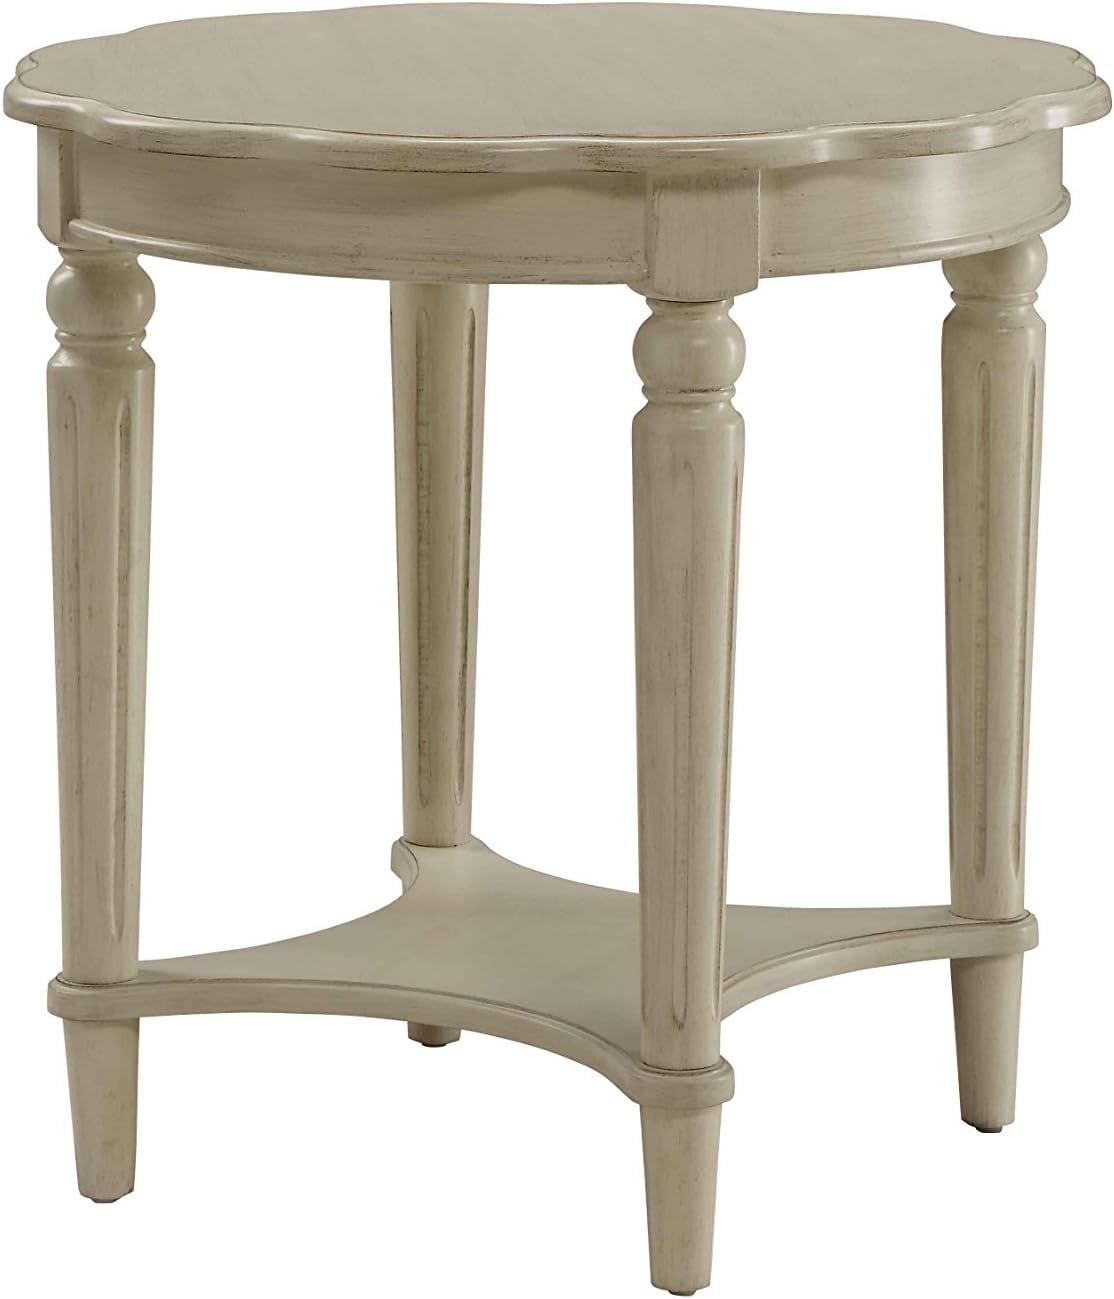 Antique White Round Wooden End Table with Shelf